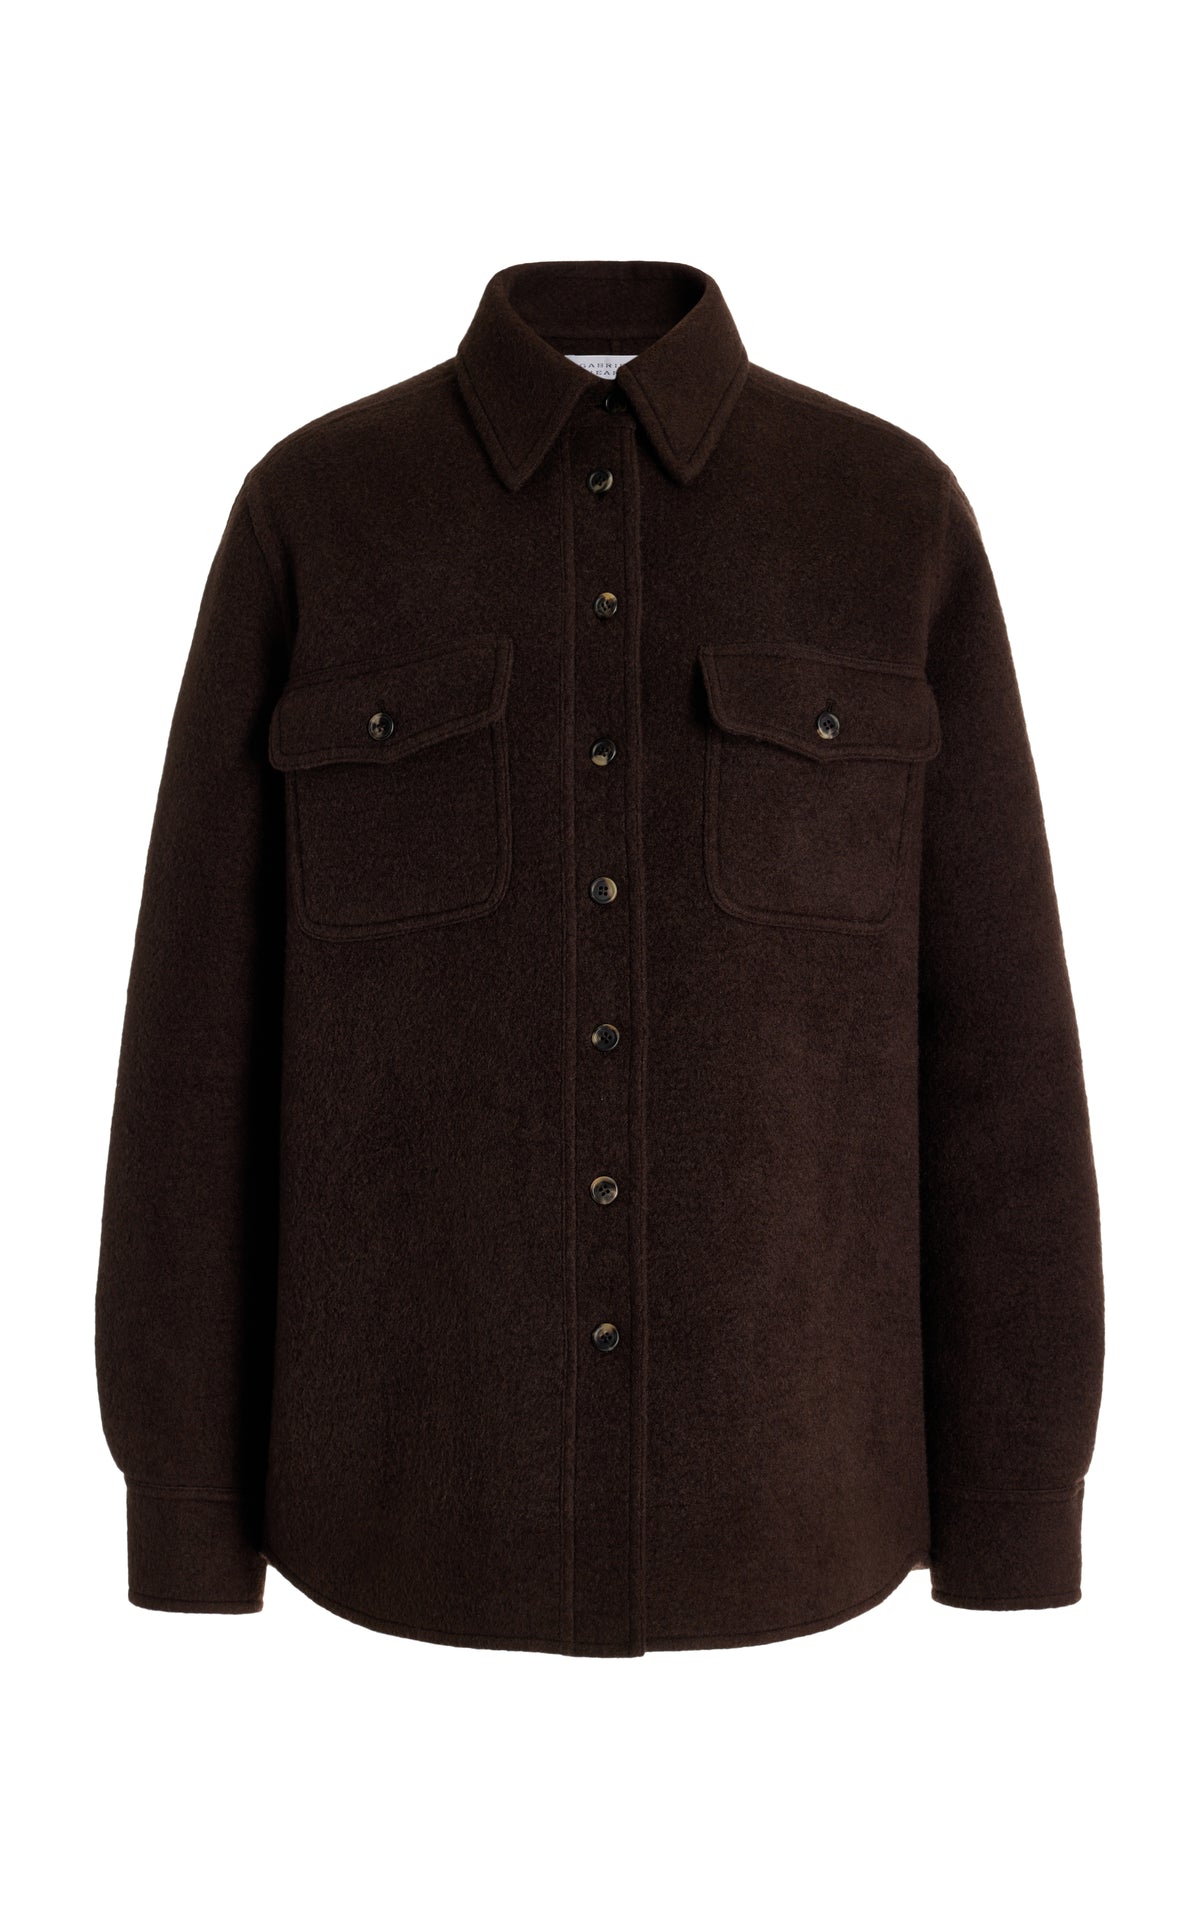 John Austin Top in Chocolate Recycled Cashmere Felt